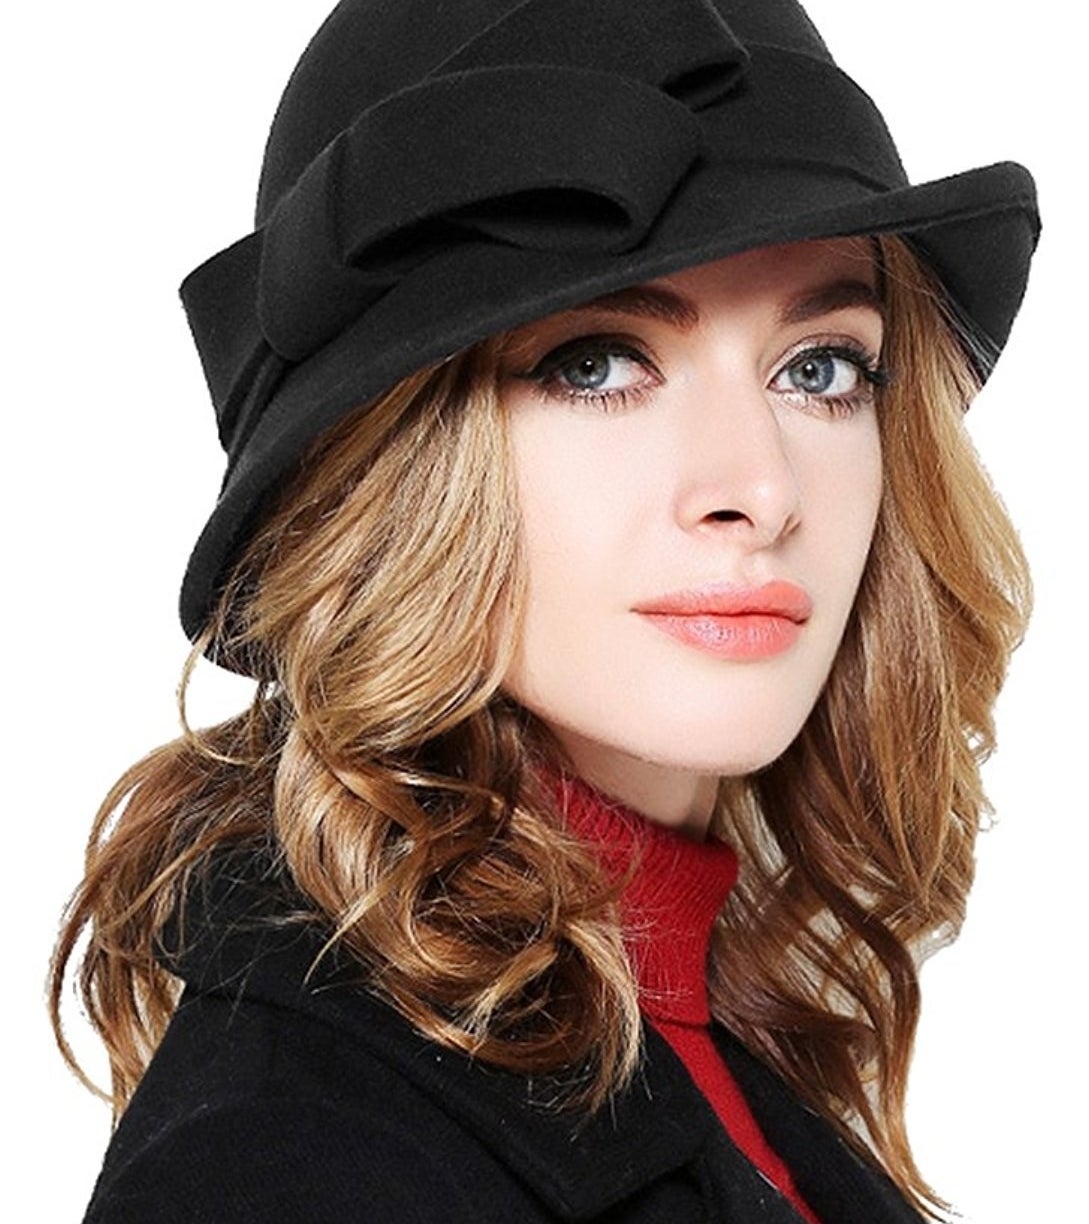 35 Hats That Absolutely Belong On Your Head